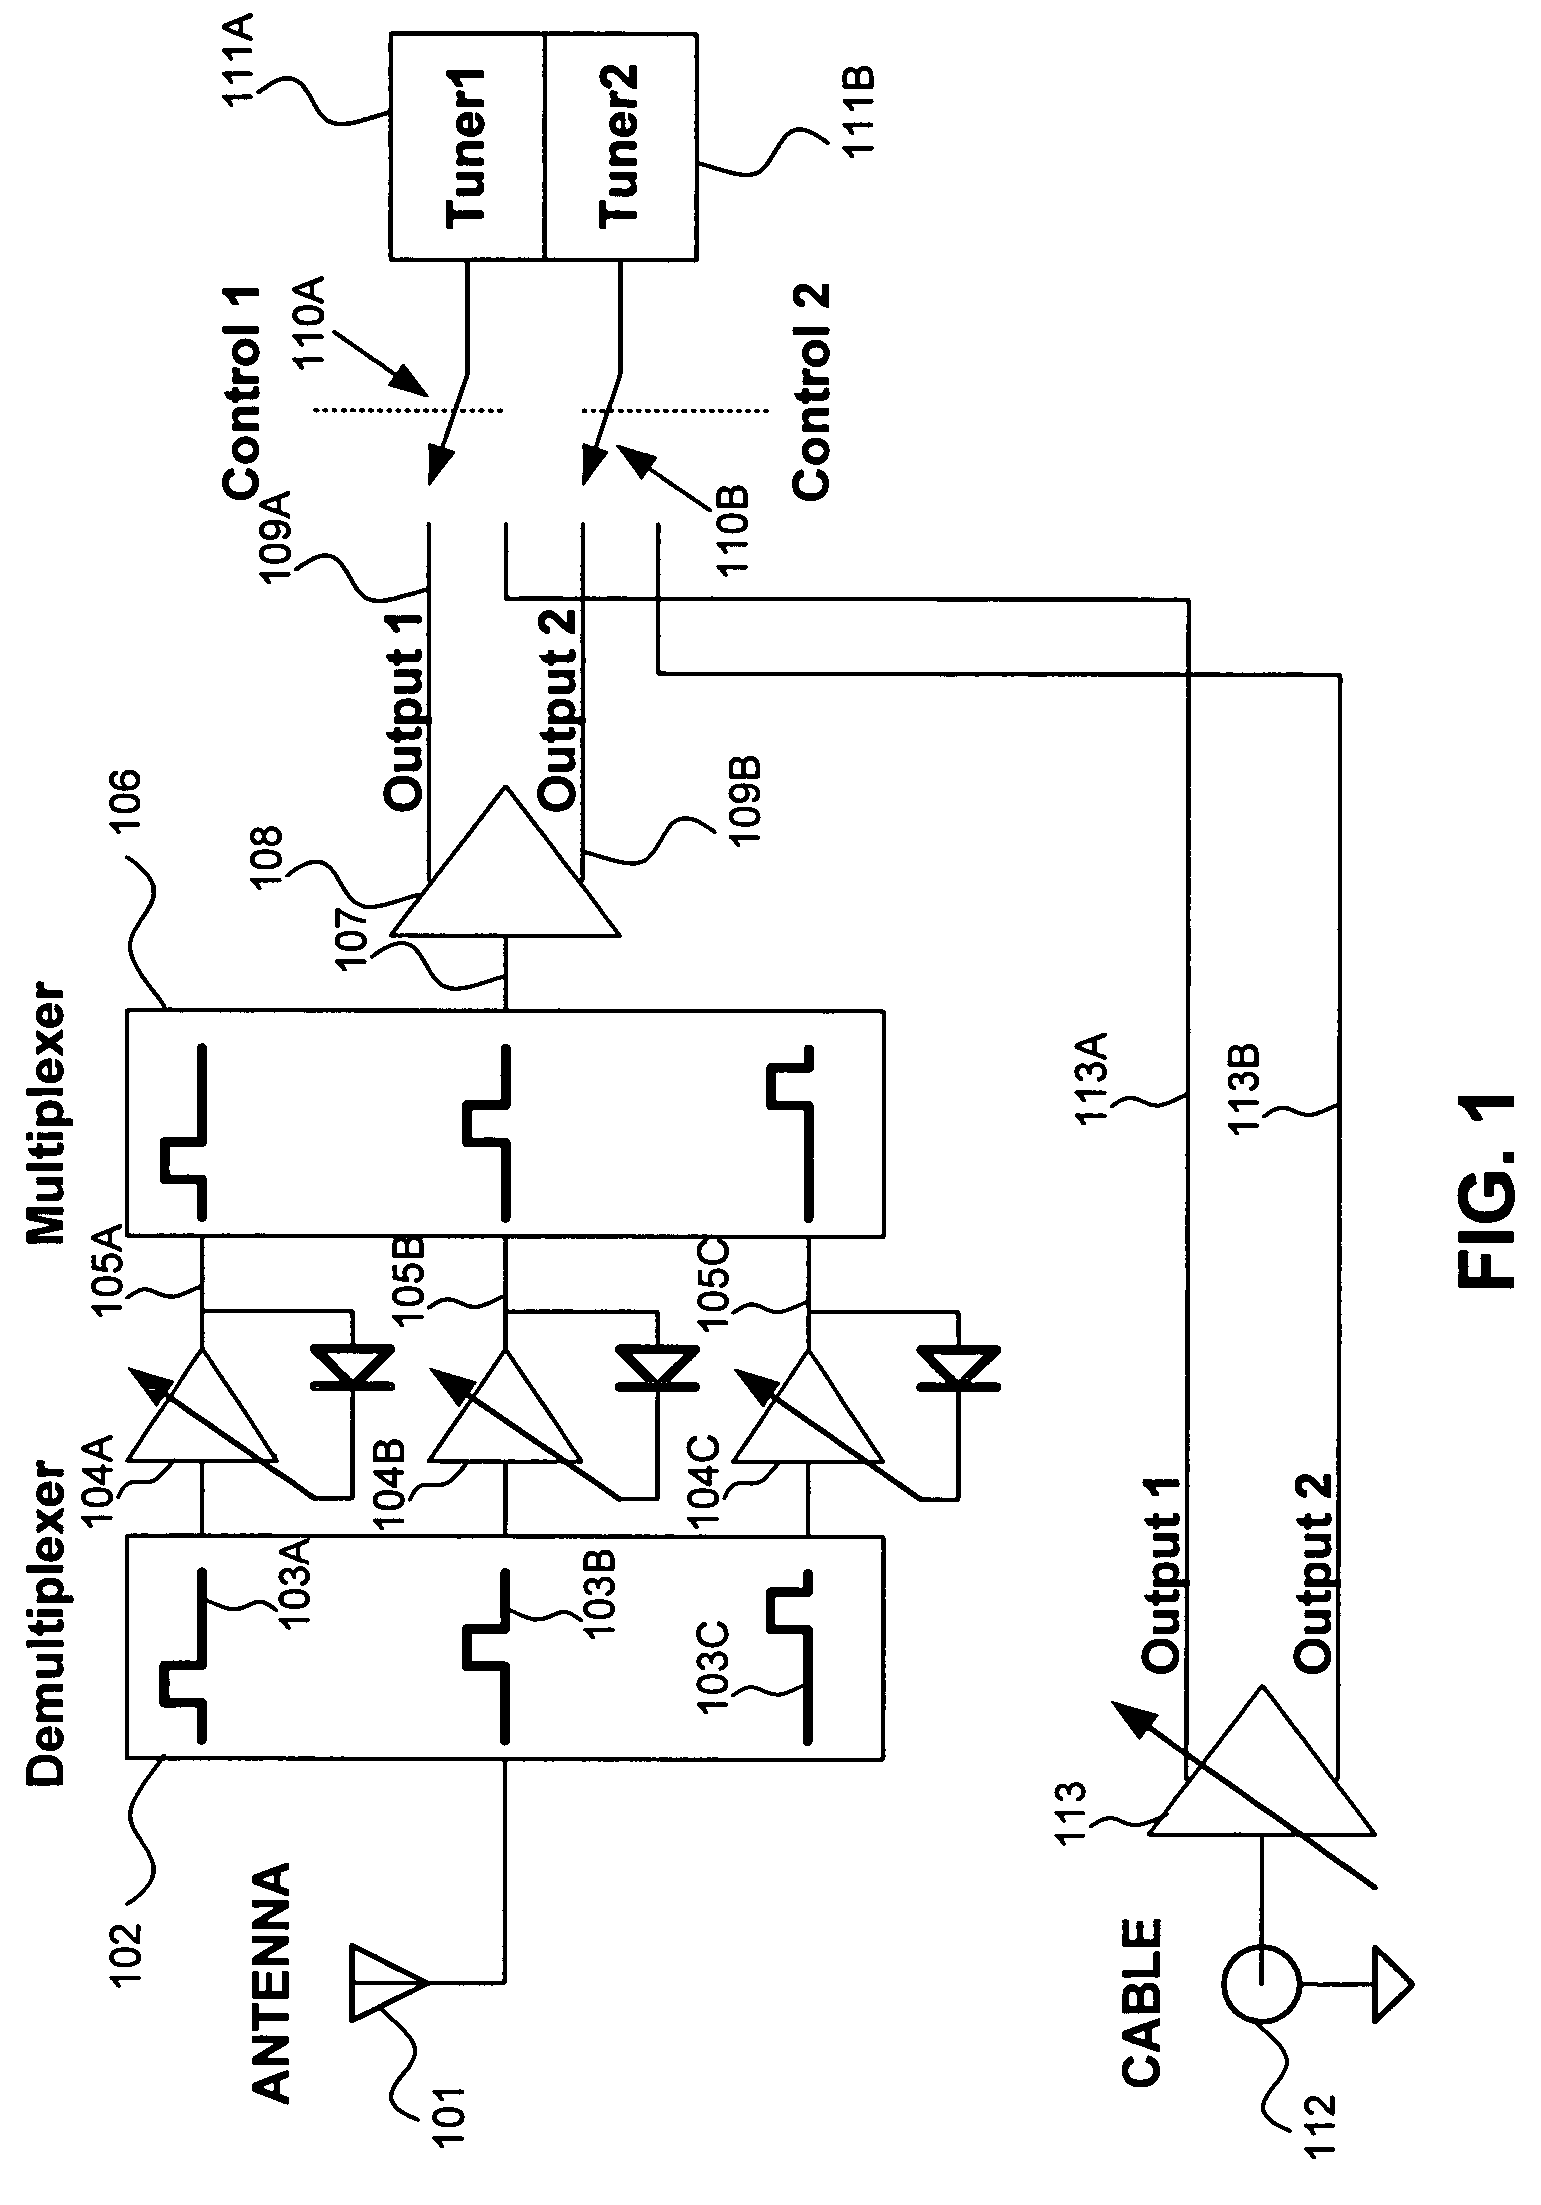 Multi-input multi-output tuner front ends